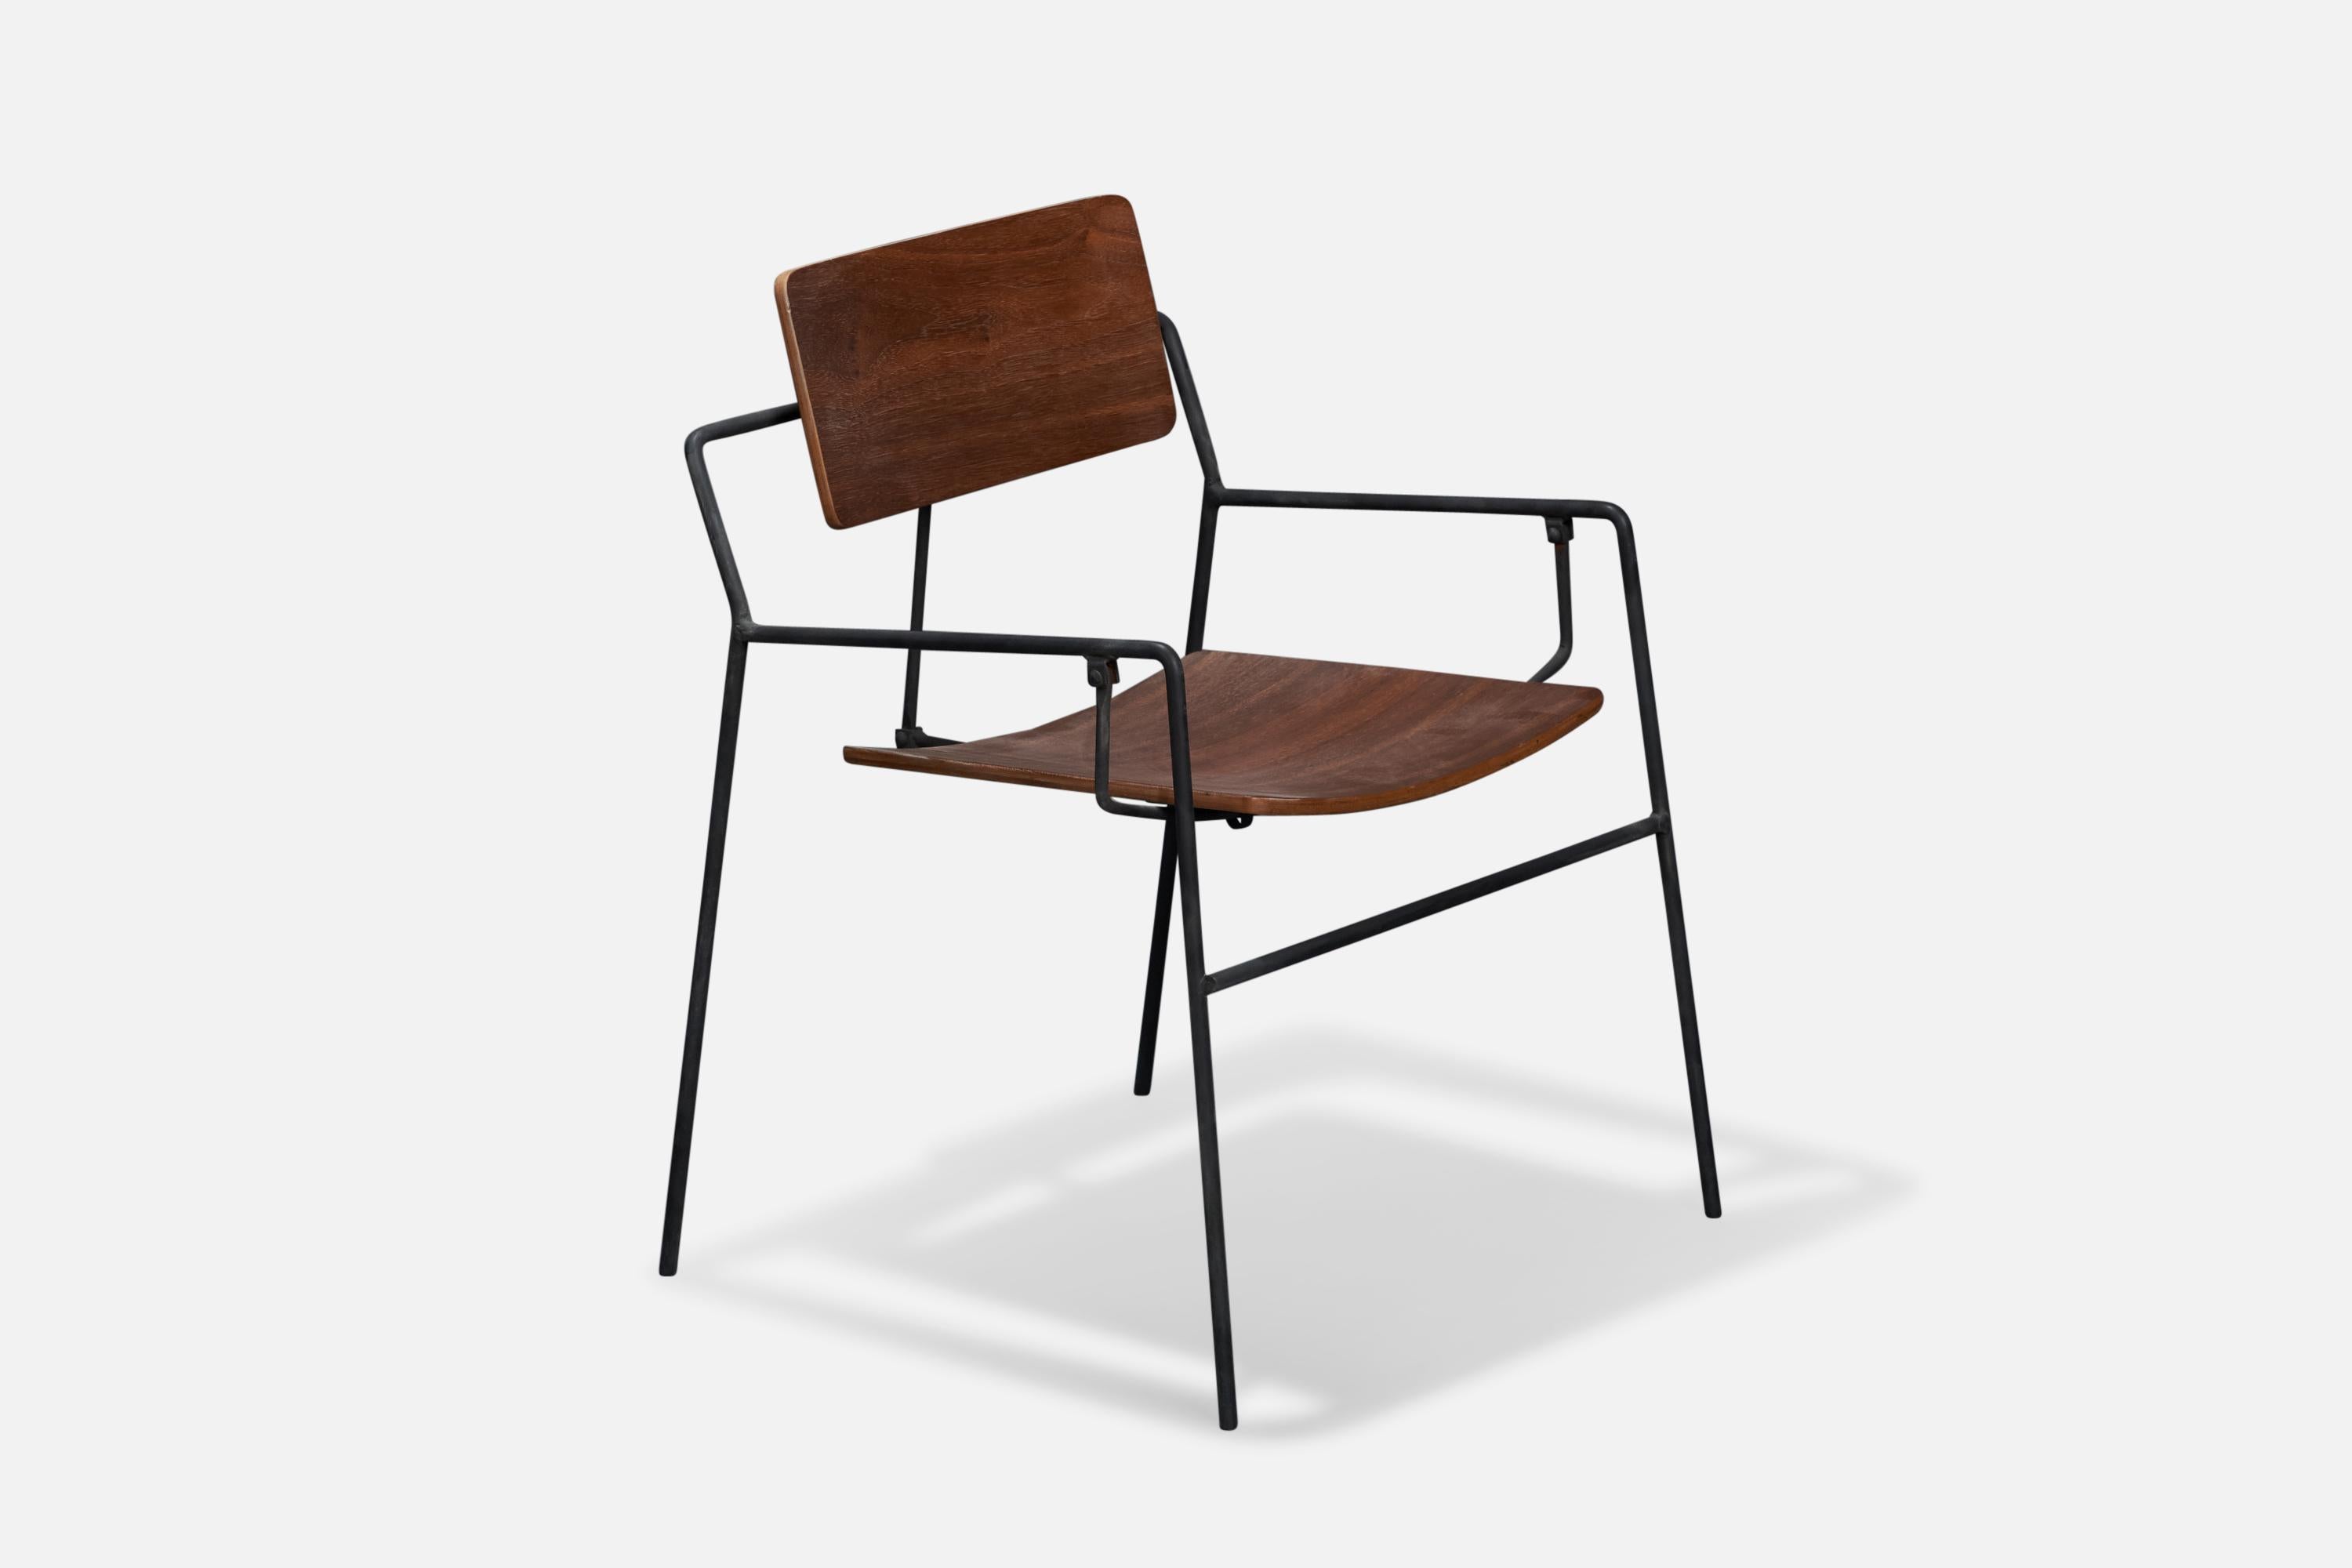 A swinging black-painted iron and walnut side chair designed by Arthur Umanoff in 1953 and produced by The Elton Company, USA, 1950s.

Seat height: 15.75